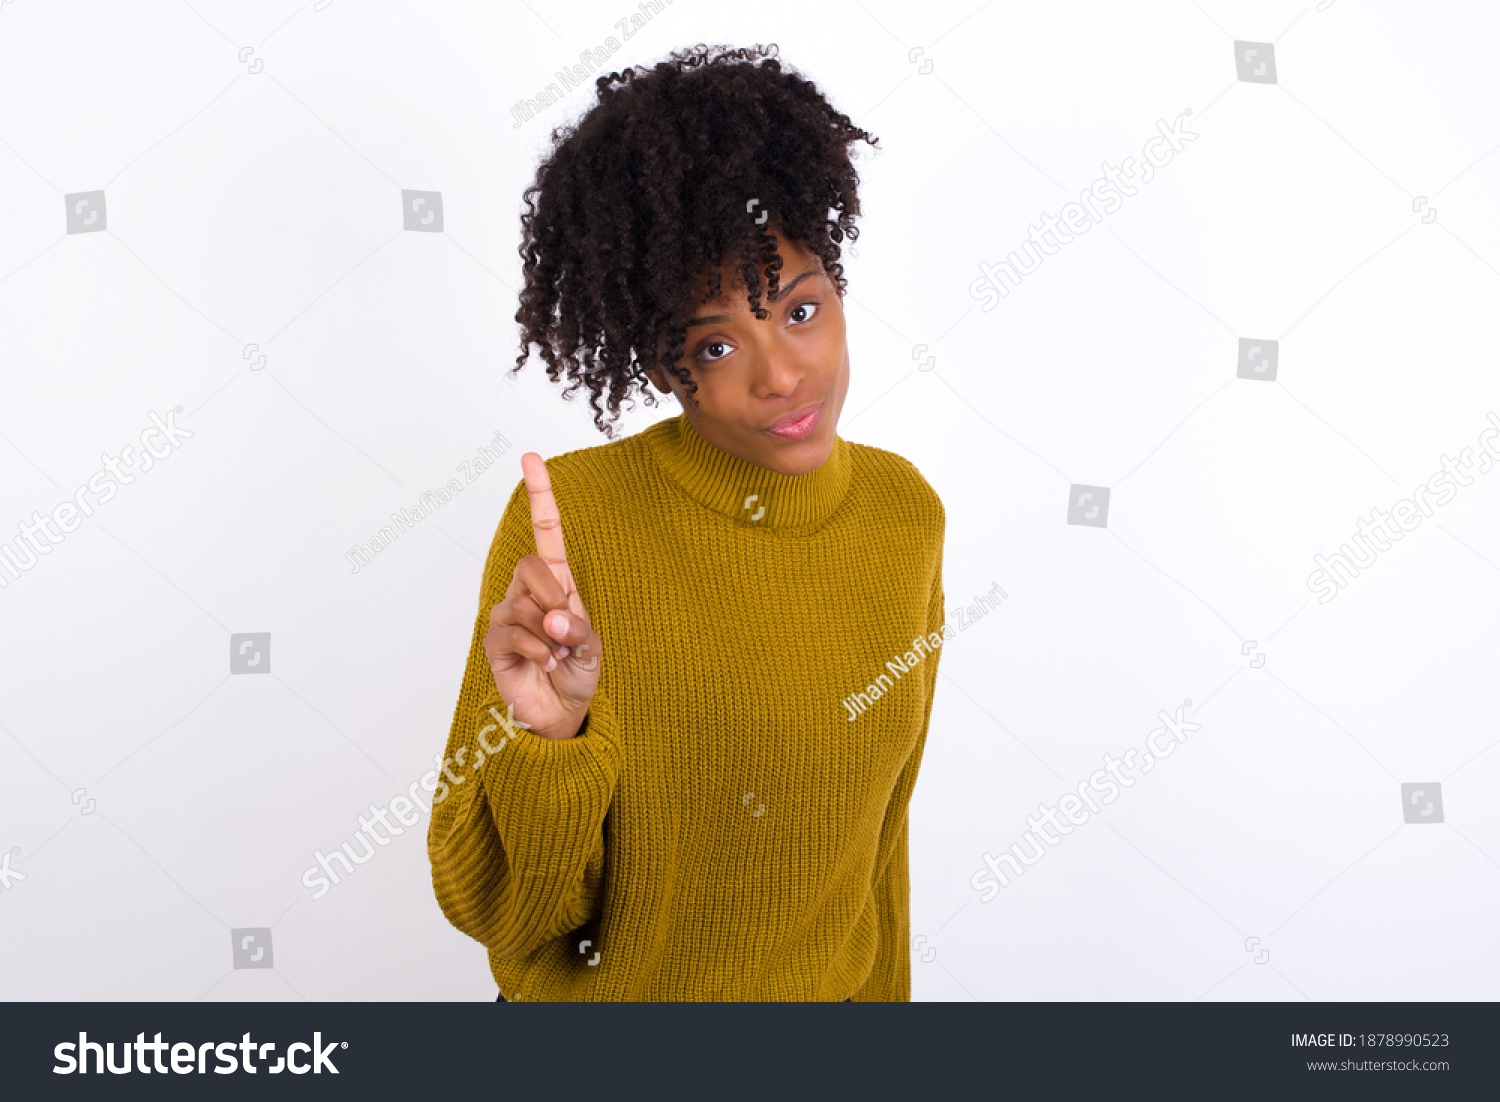 No sign gesture. Closeup portrait unhappy Young beautiful African American woman wearing knitted sweater against white wall raising fore finger up saying no. Negative emotions facial expressions, feel #1878990523